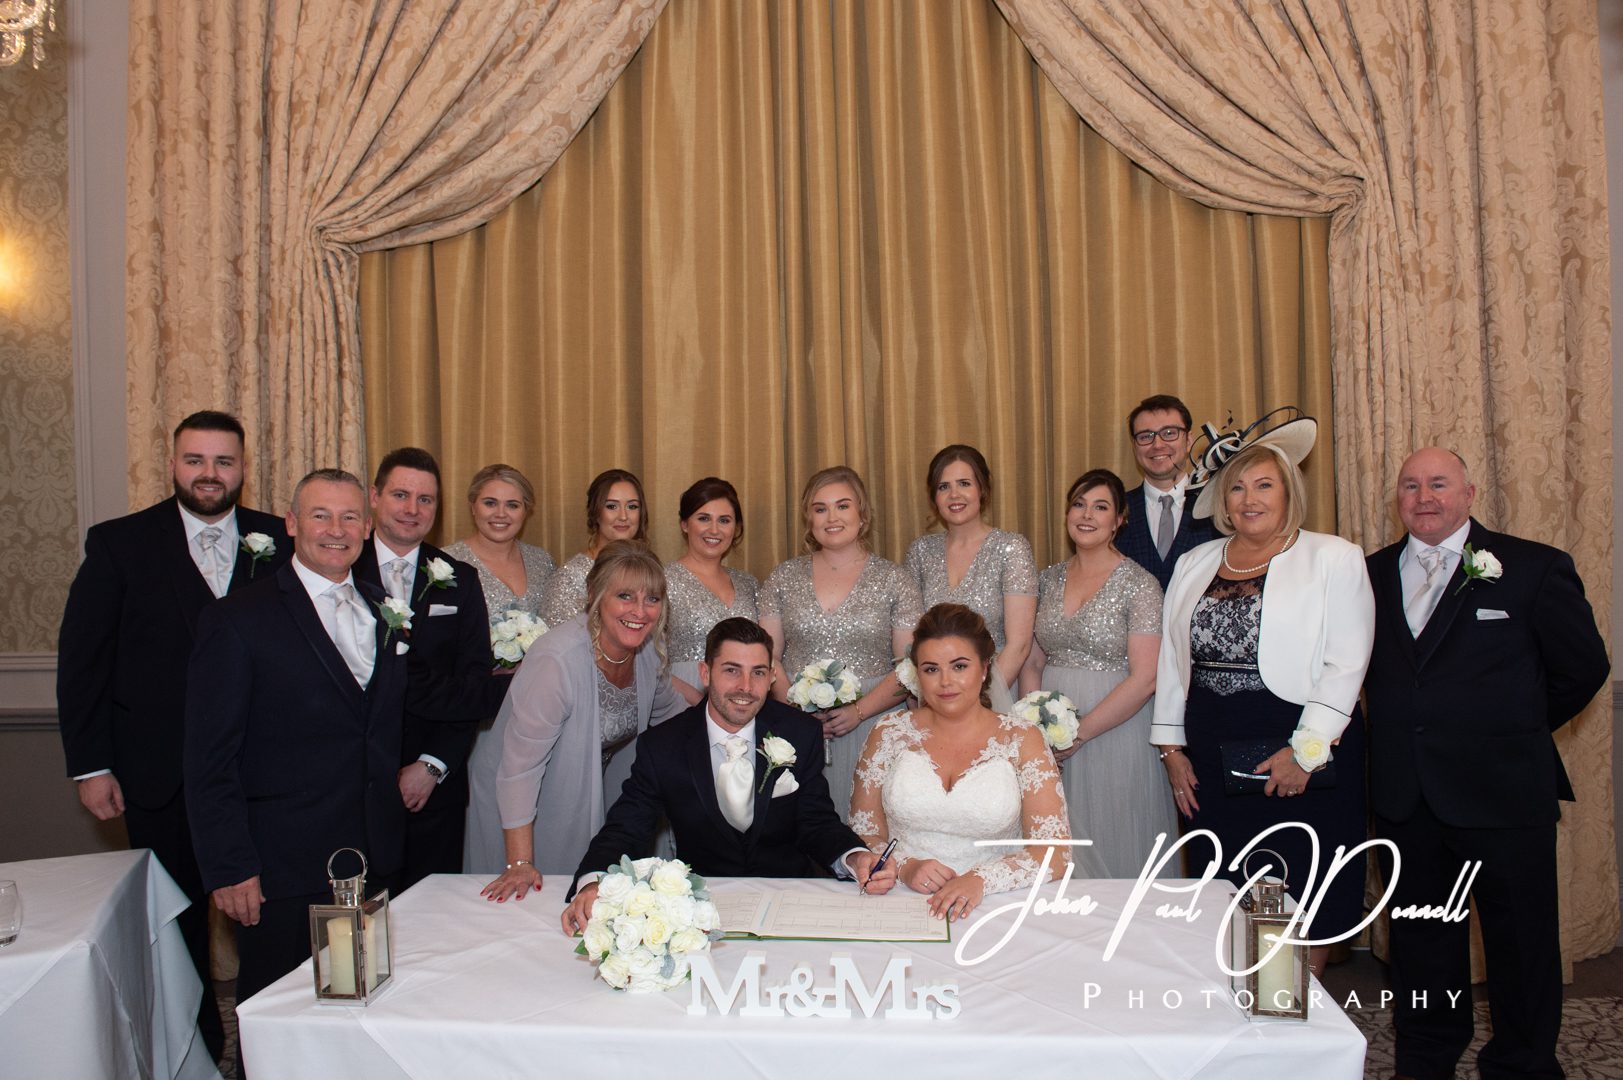 Rhiannon and Ryans Wedding Photographs at Down Hall